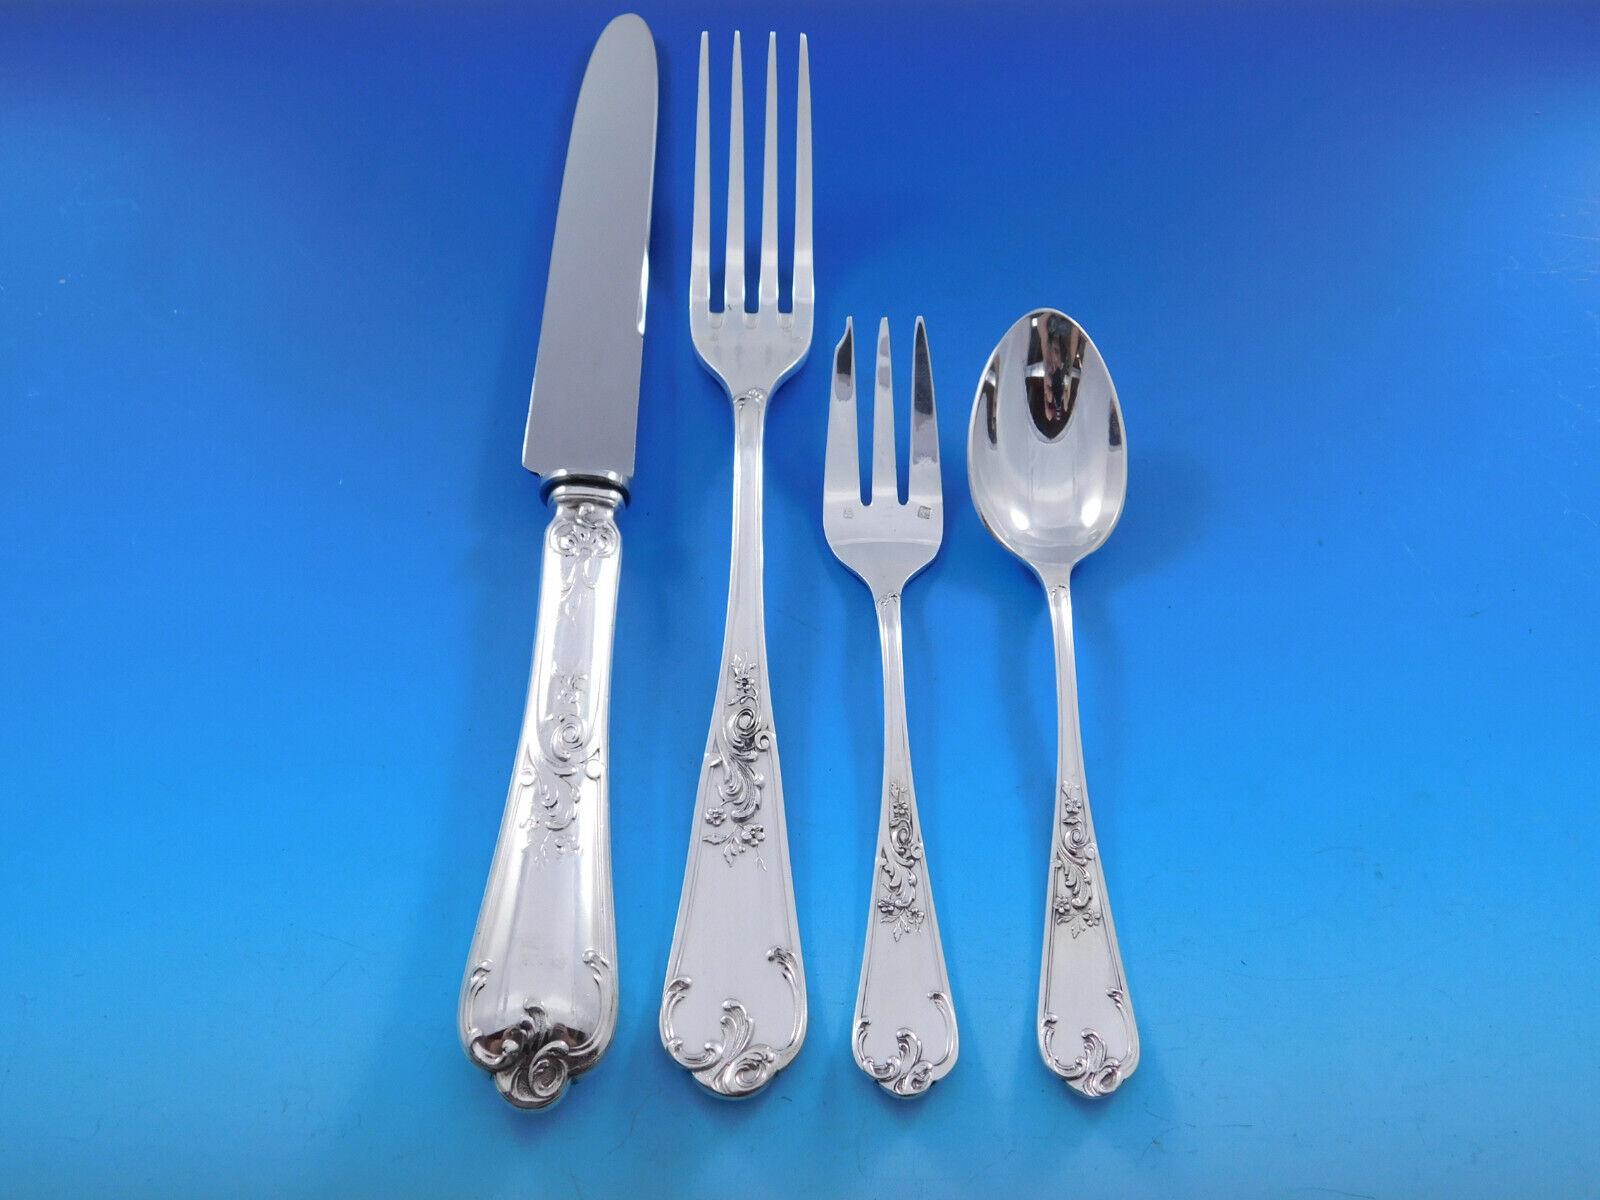 Superb dinner and luncheon size Rocaille by Saint Medard Argenterie French Silverplate set - 145 pieces. This set includes:

12 Large Dinner Size Knives, 10 1/8